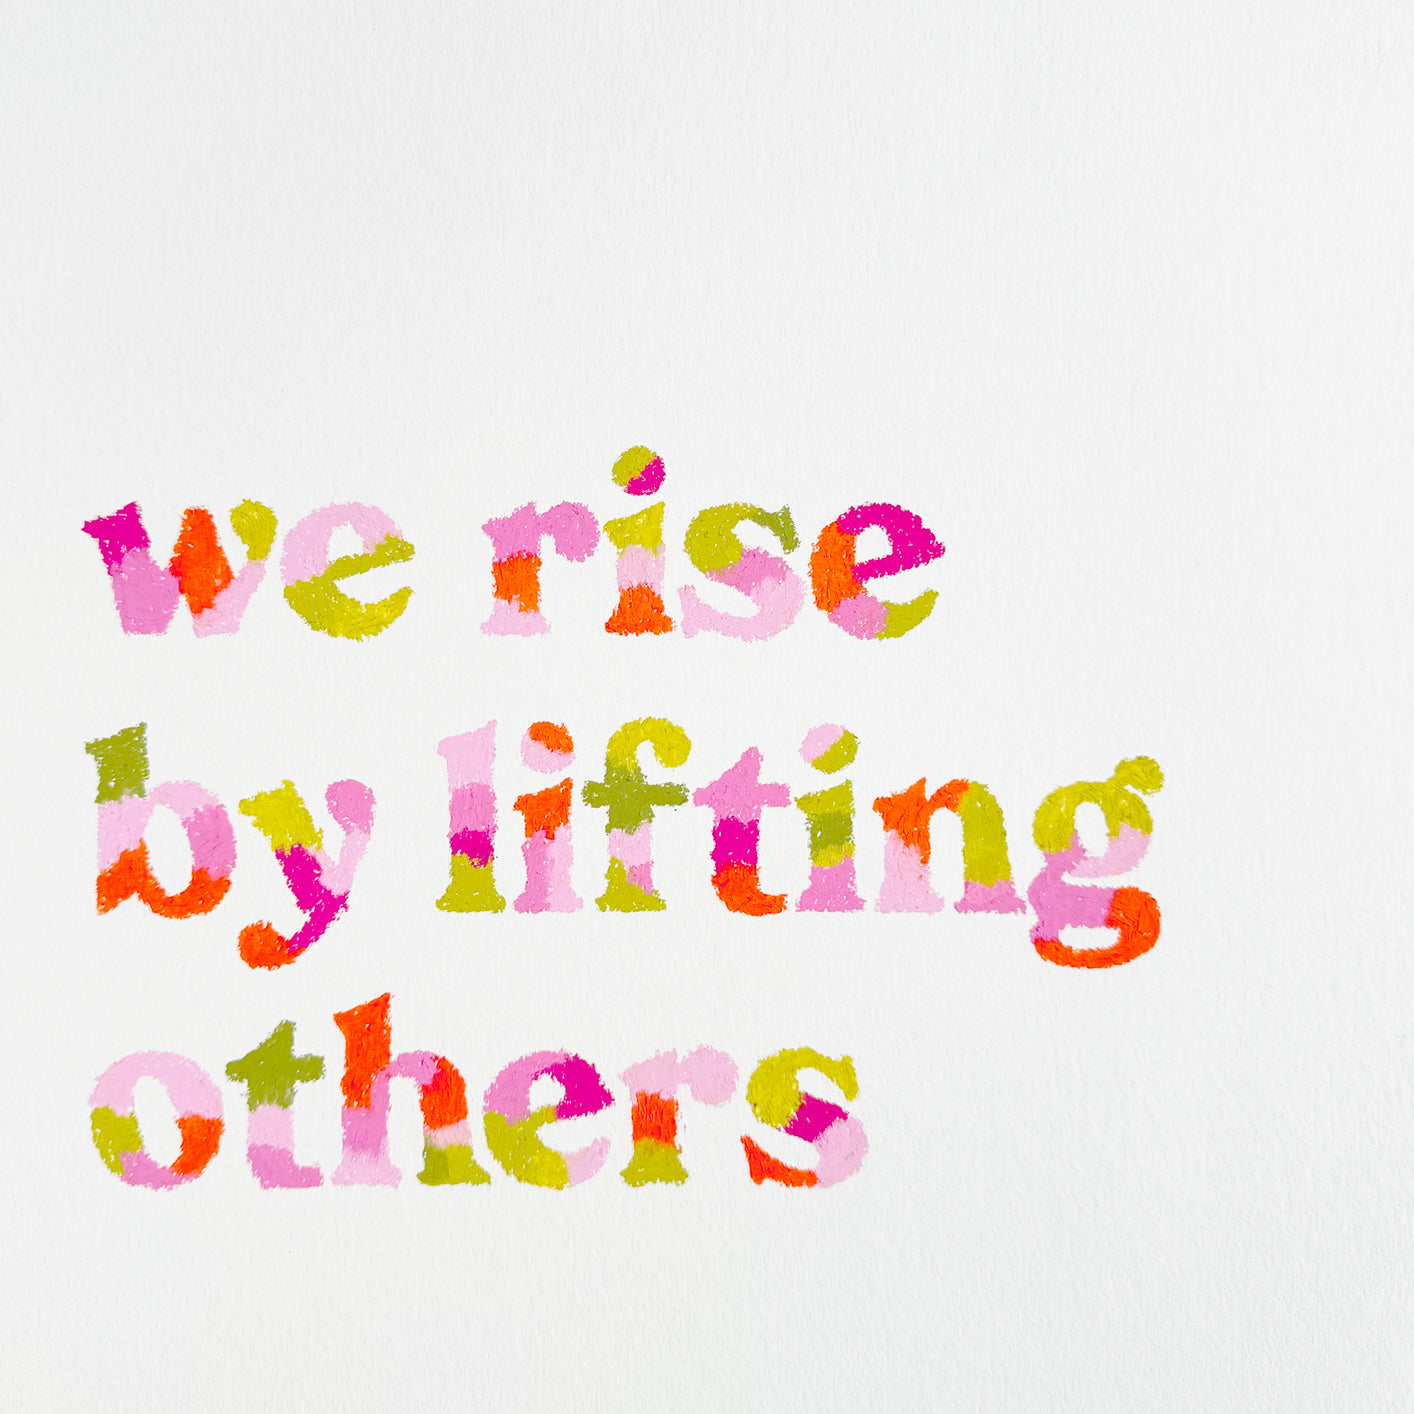 We Rise By Lifting Others Original Artwork